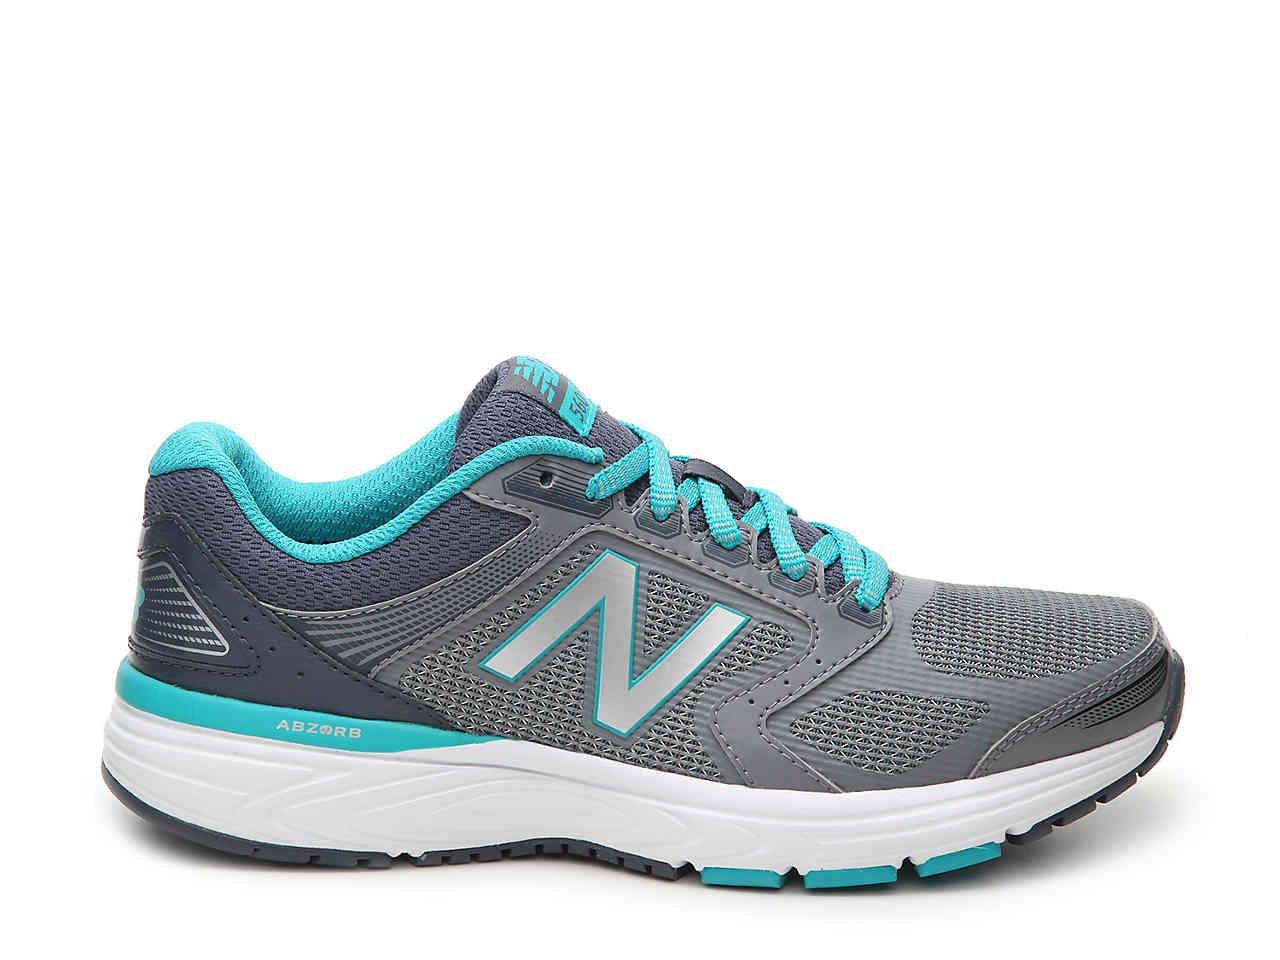 New Balance 560 V7 Running Shoe in Grey/Teal (Gray) - Lyst